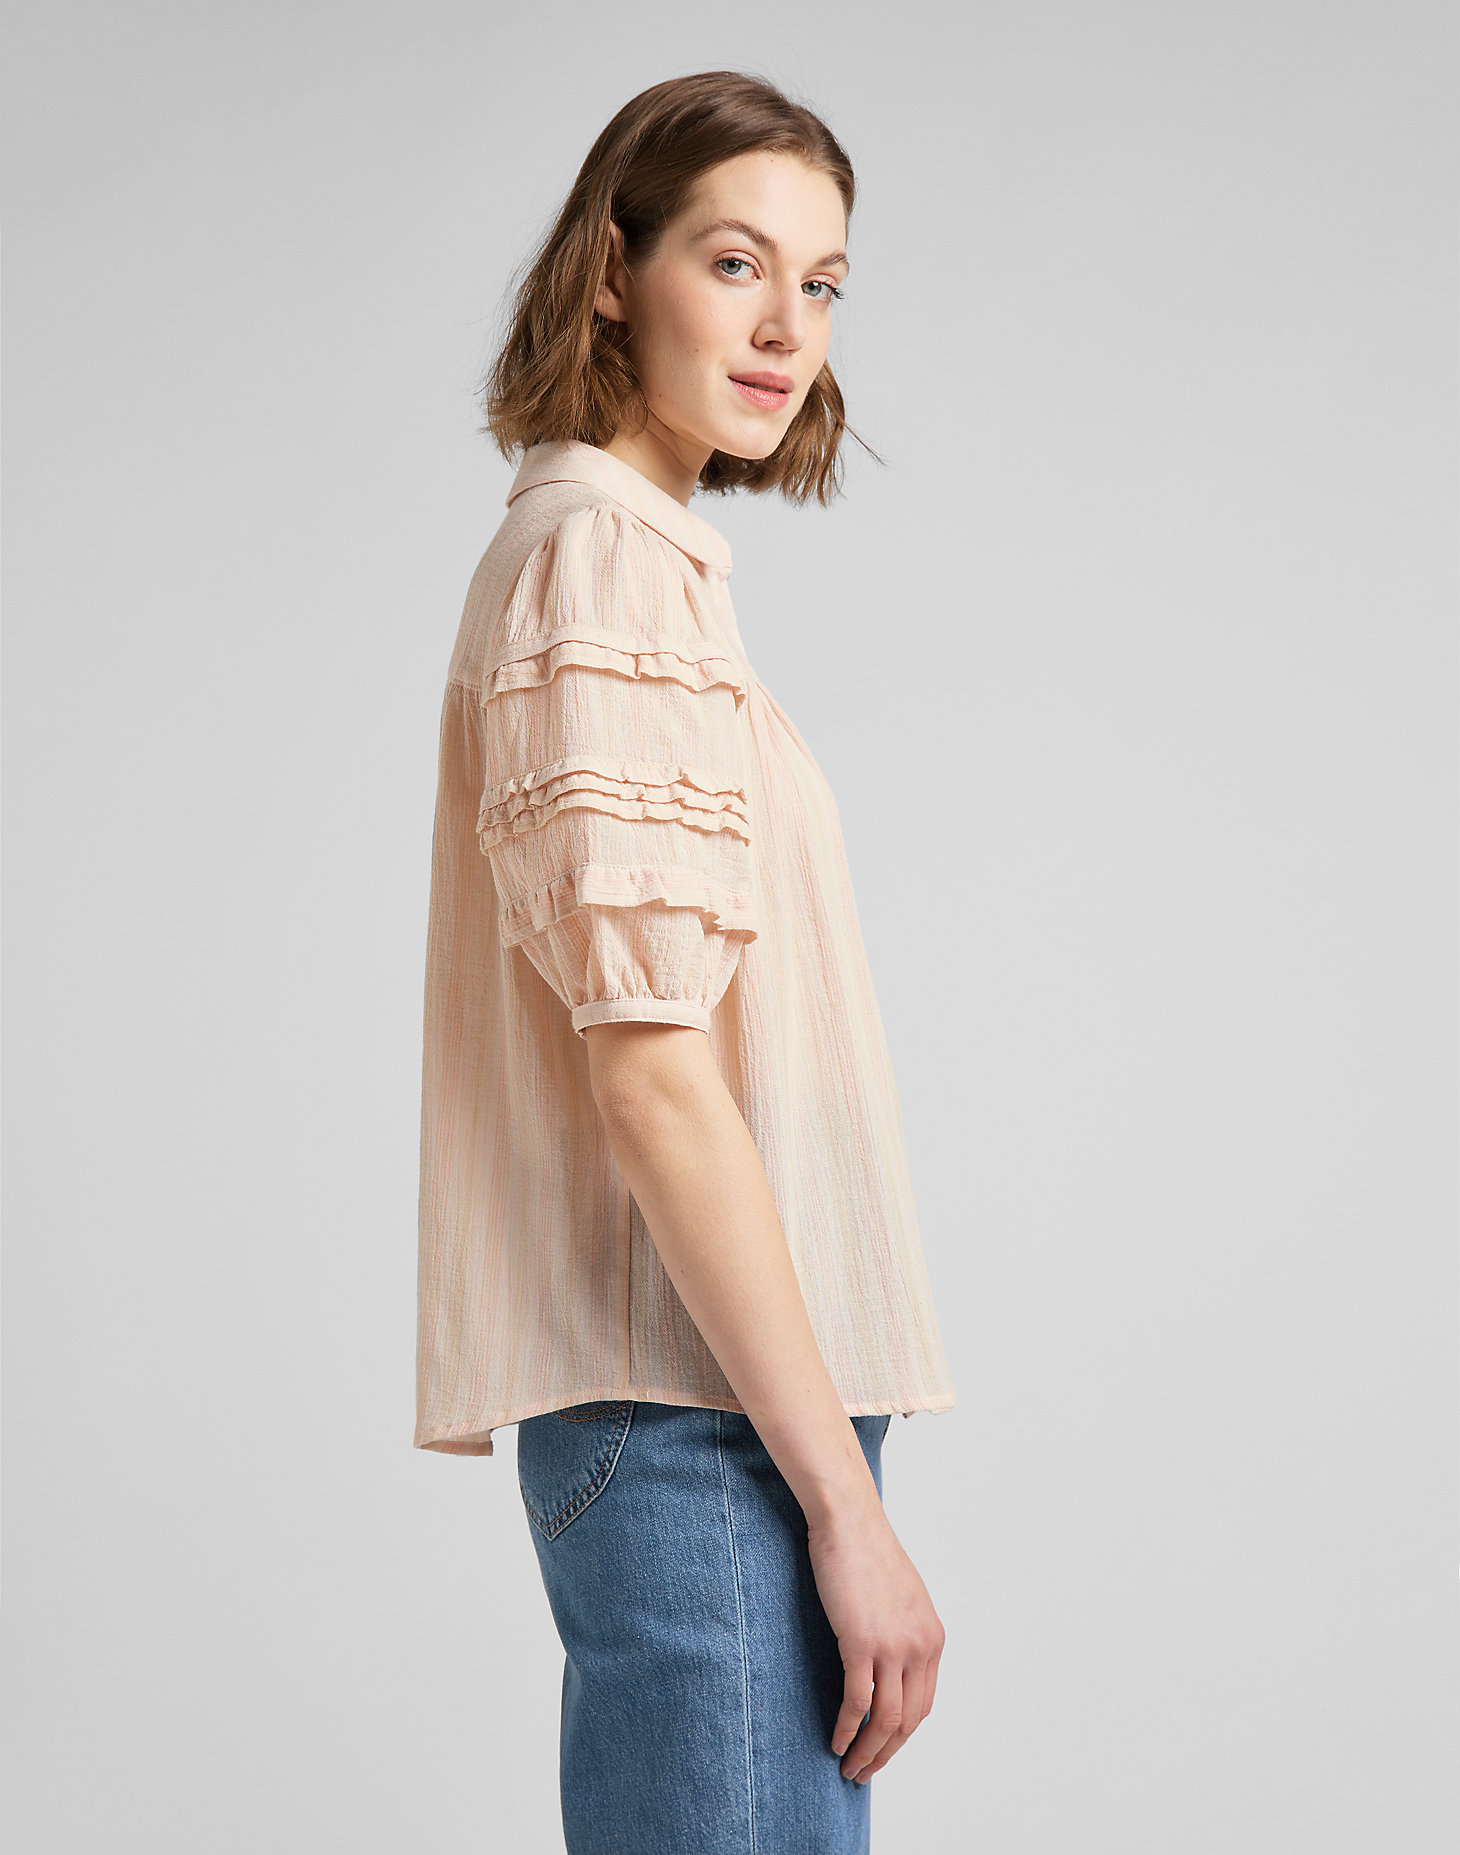 Birthday Cake Blouse in Soft Pink alternative view 5